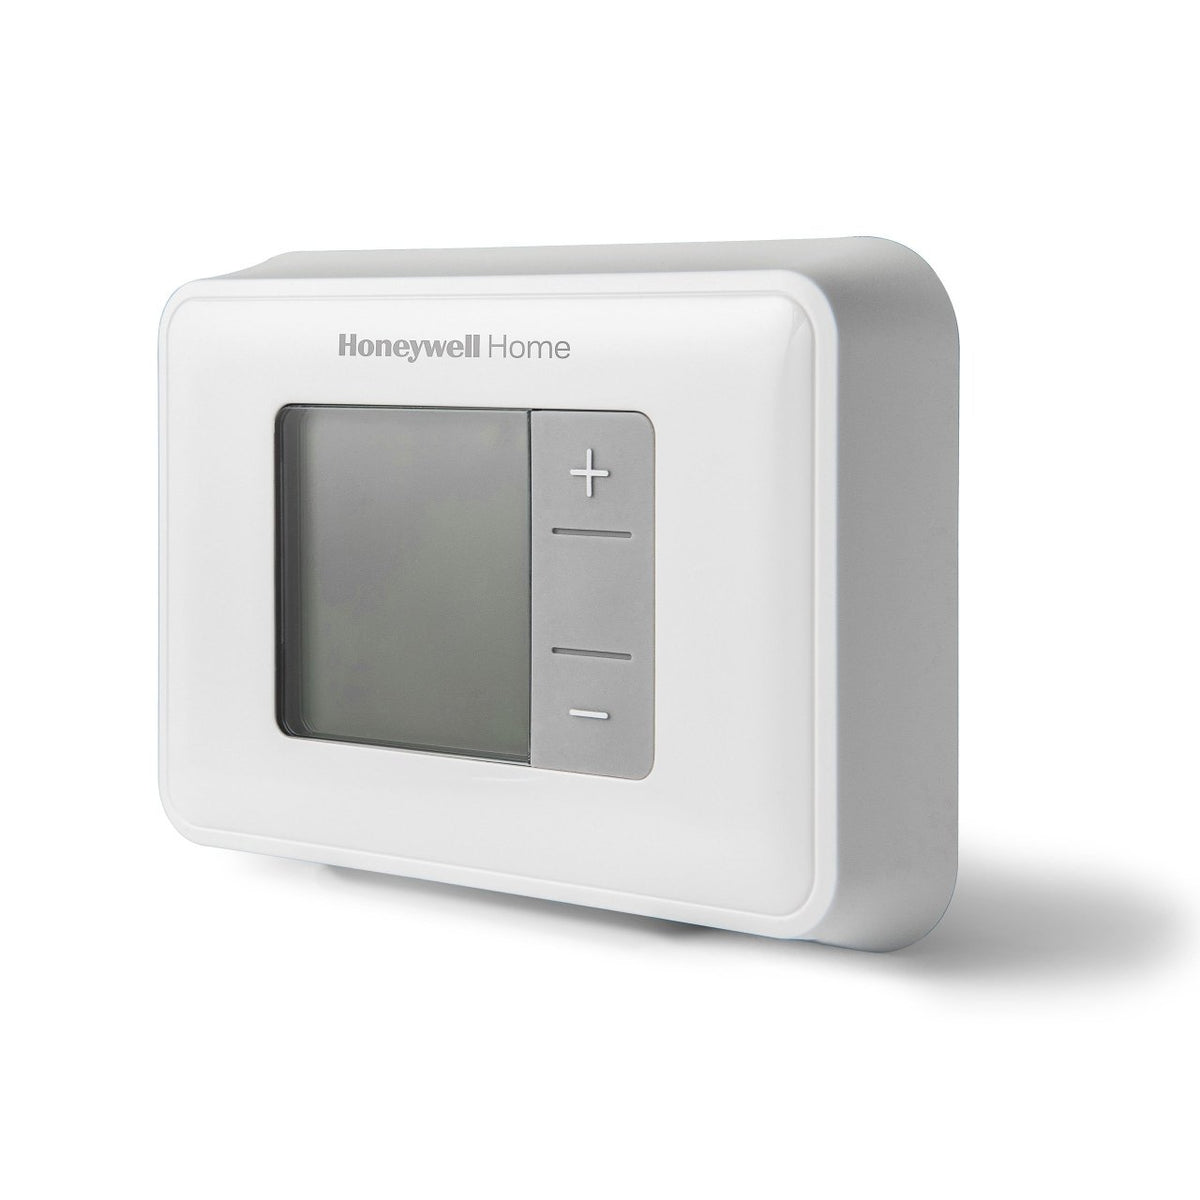 Honeywell Home Push Buttons Non-Programmable Thermostat RTH5160D1003/E-1